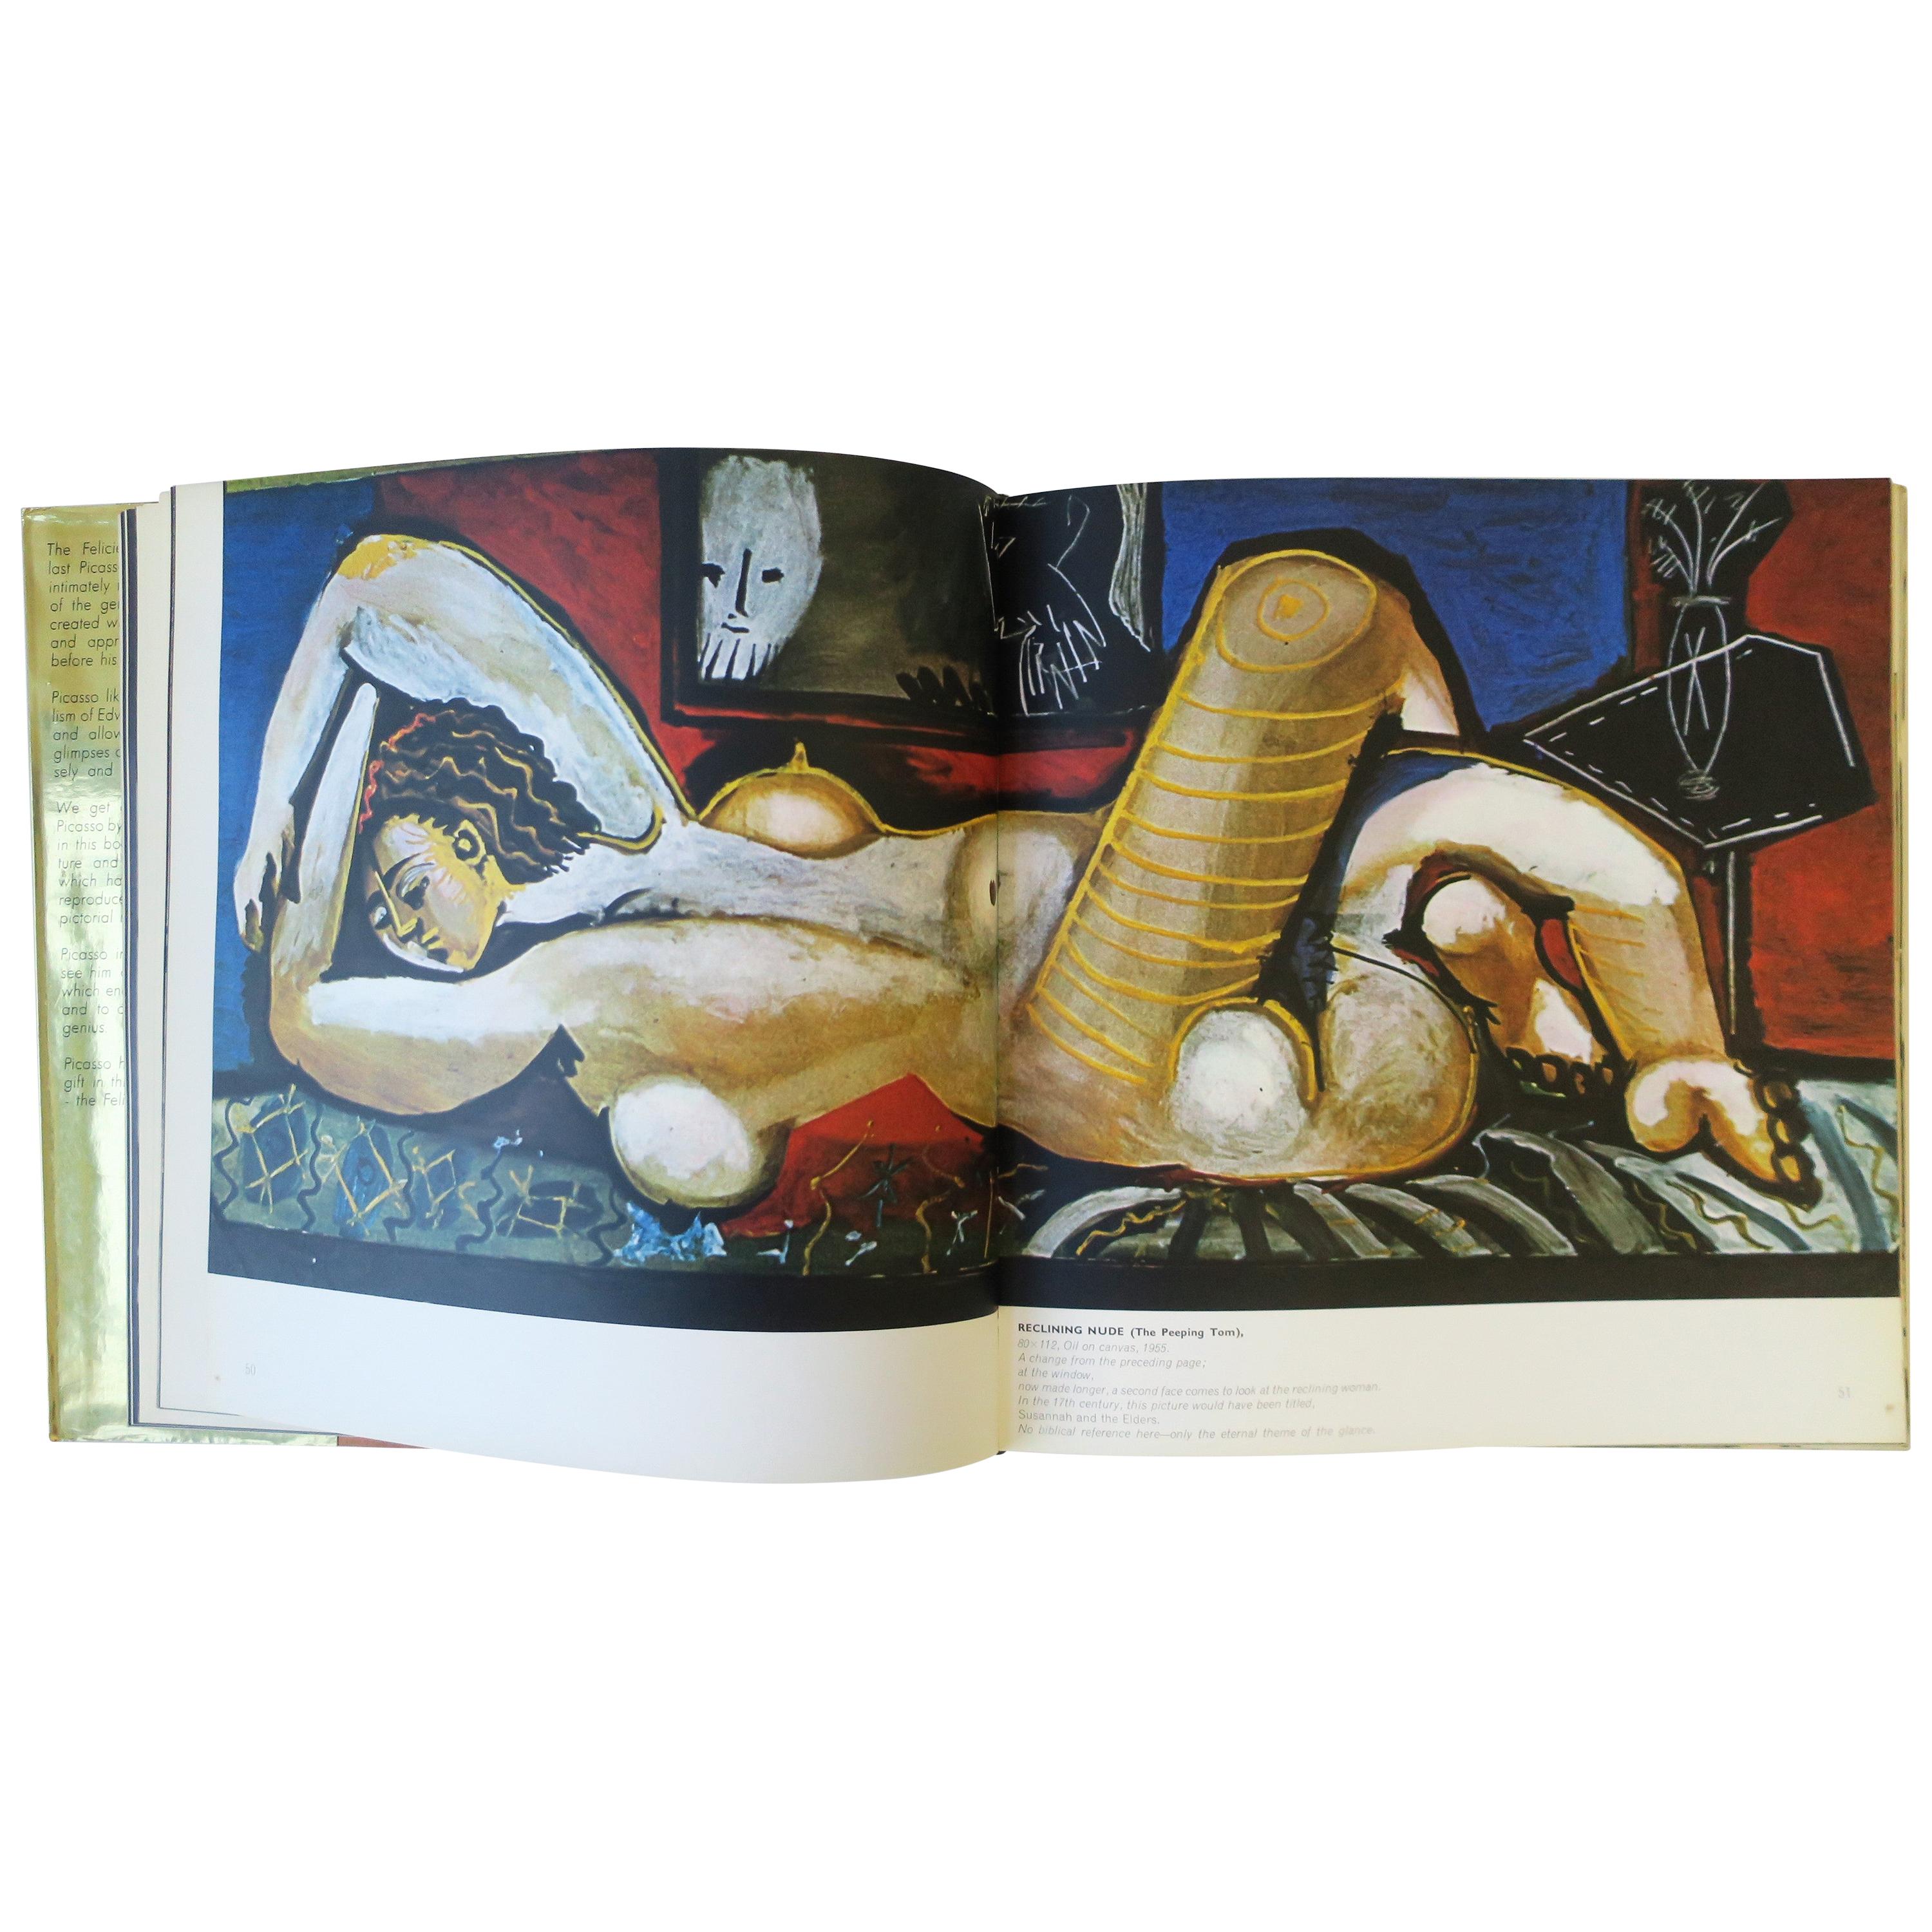 '70s Picasso Gold Art Coffee Table or Library Book